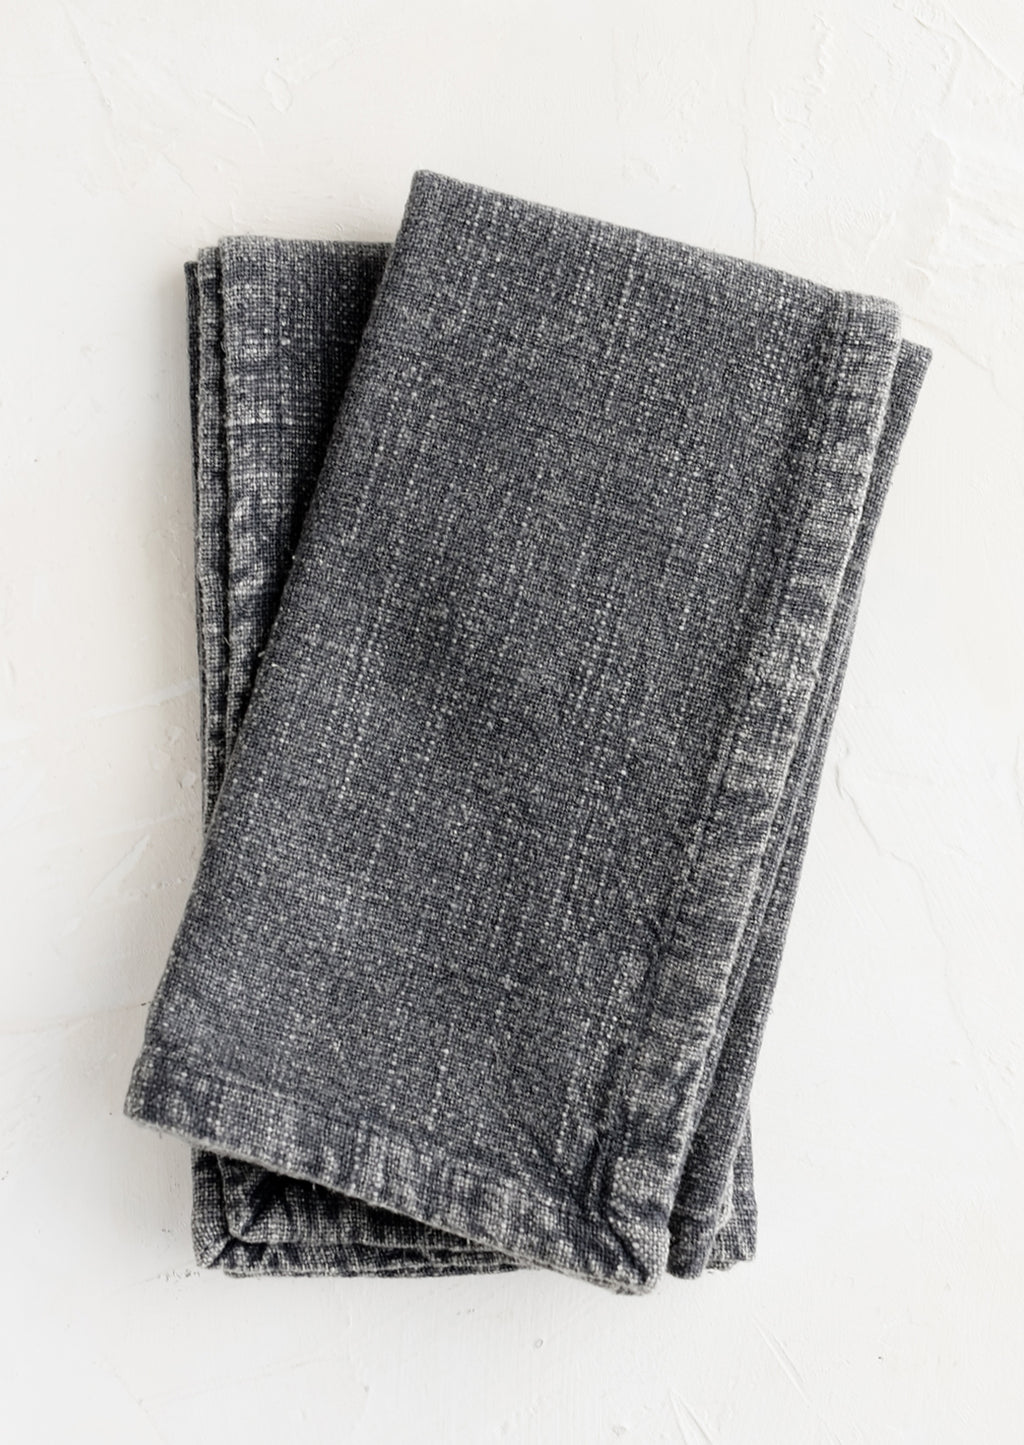 Charcoal: A pair of stonewashed napkins in mineral grey.